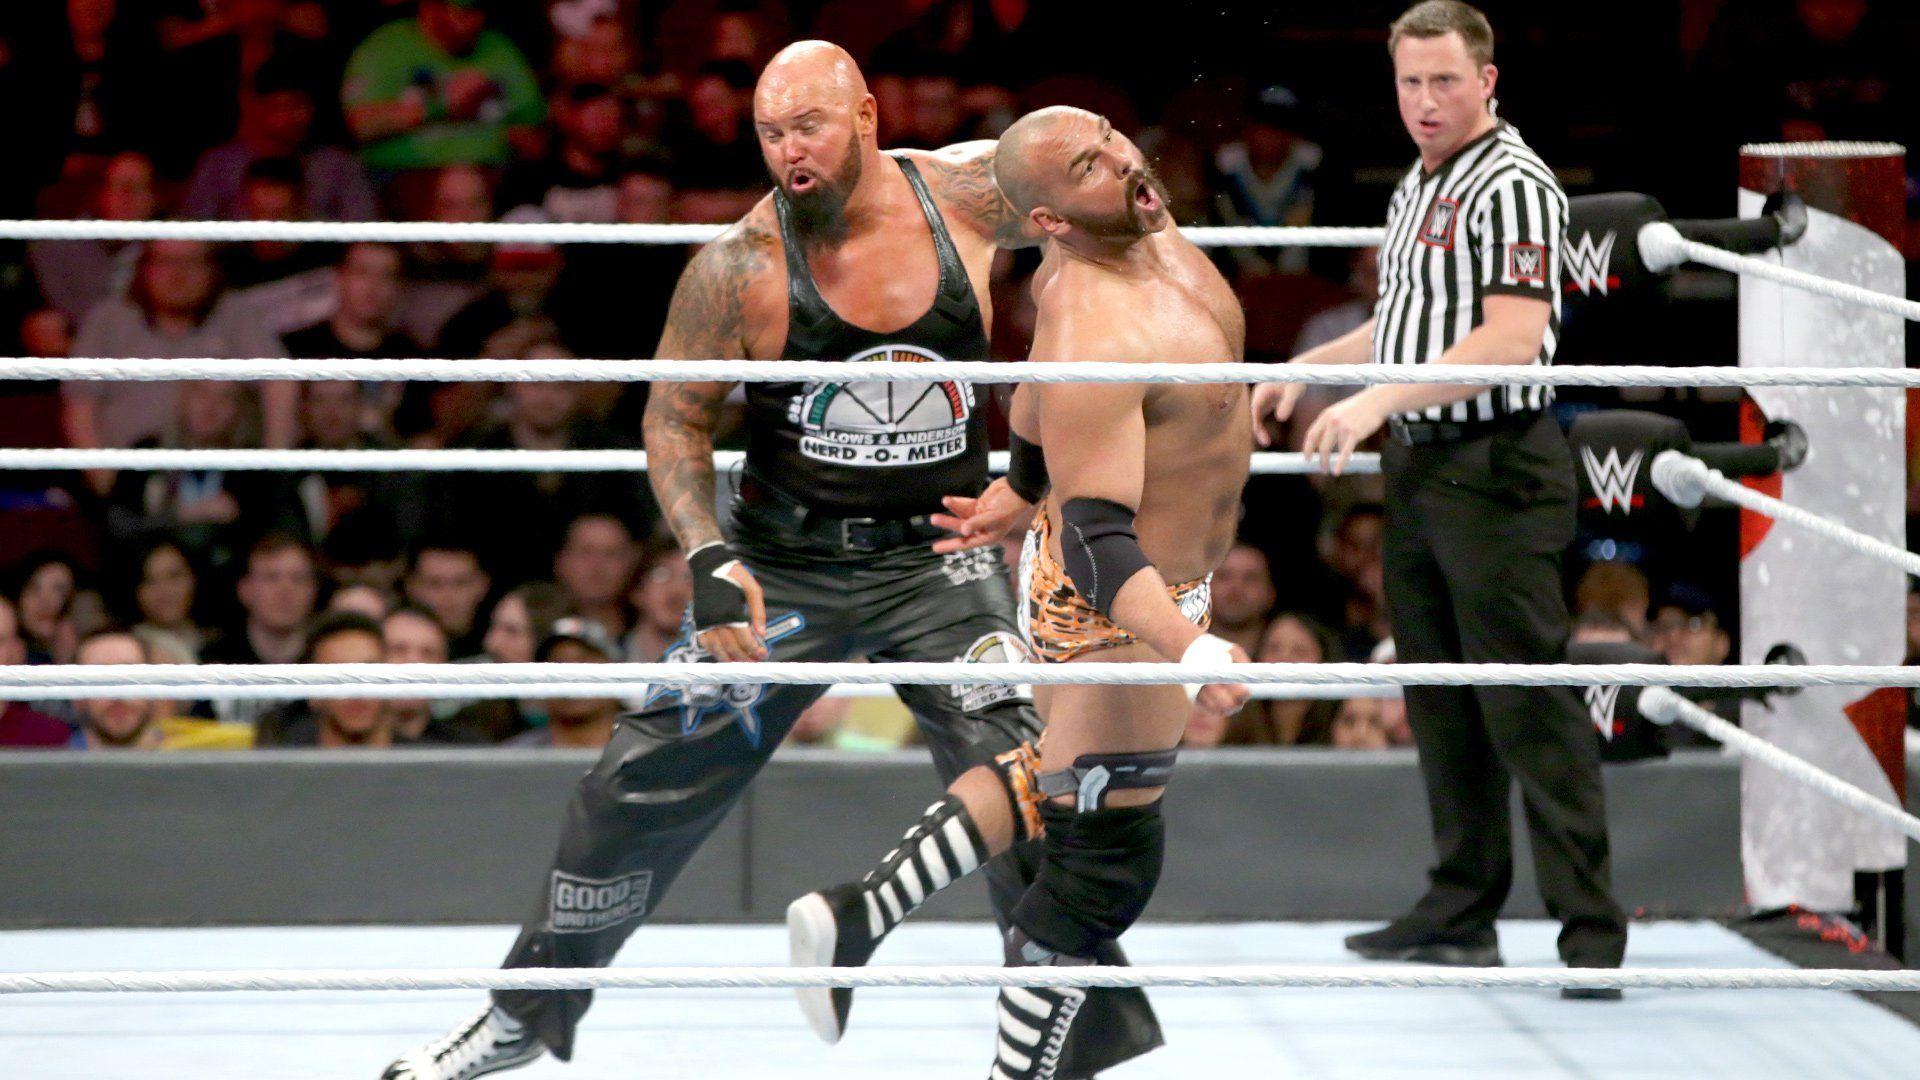 Royal Rumble. Latest News, Results, Photo, Videos and More